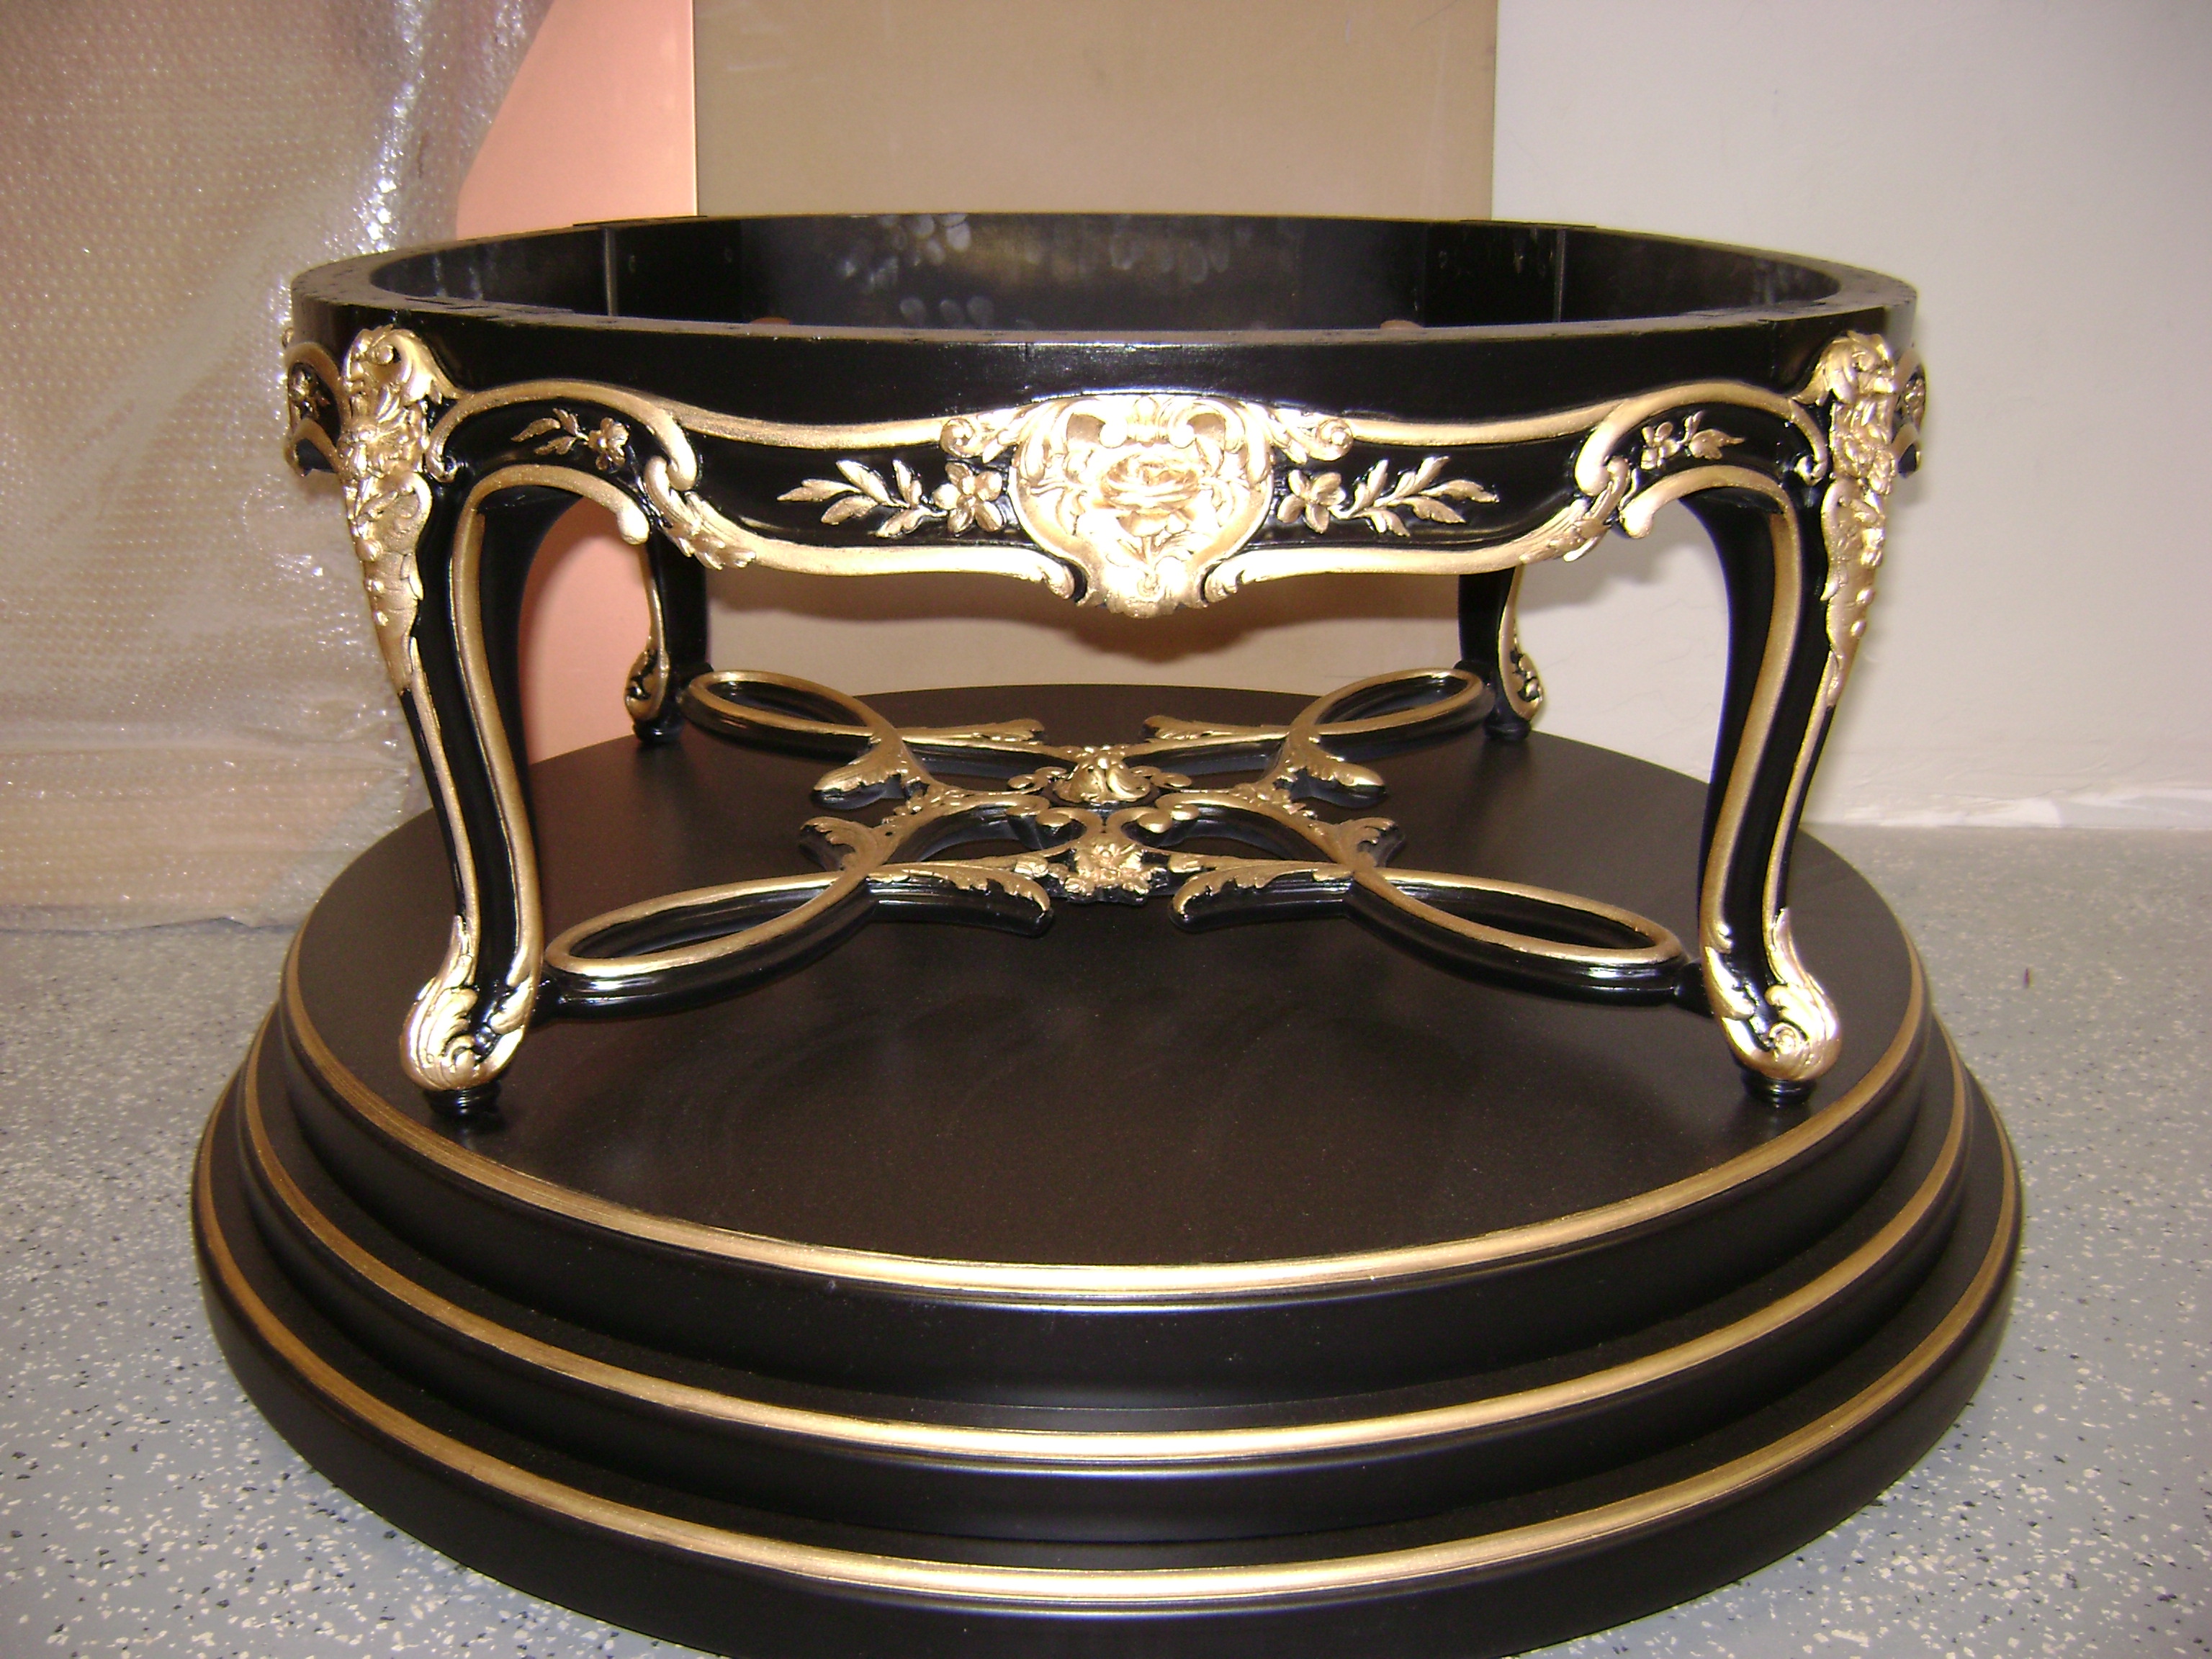 https://0201.nccdn.net/4_2/000/000/087/278/black-lacquer-table-with-gold.jpg